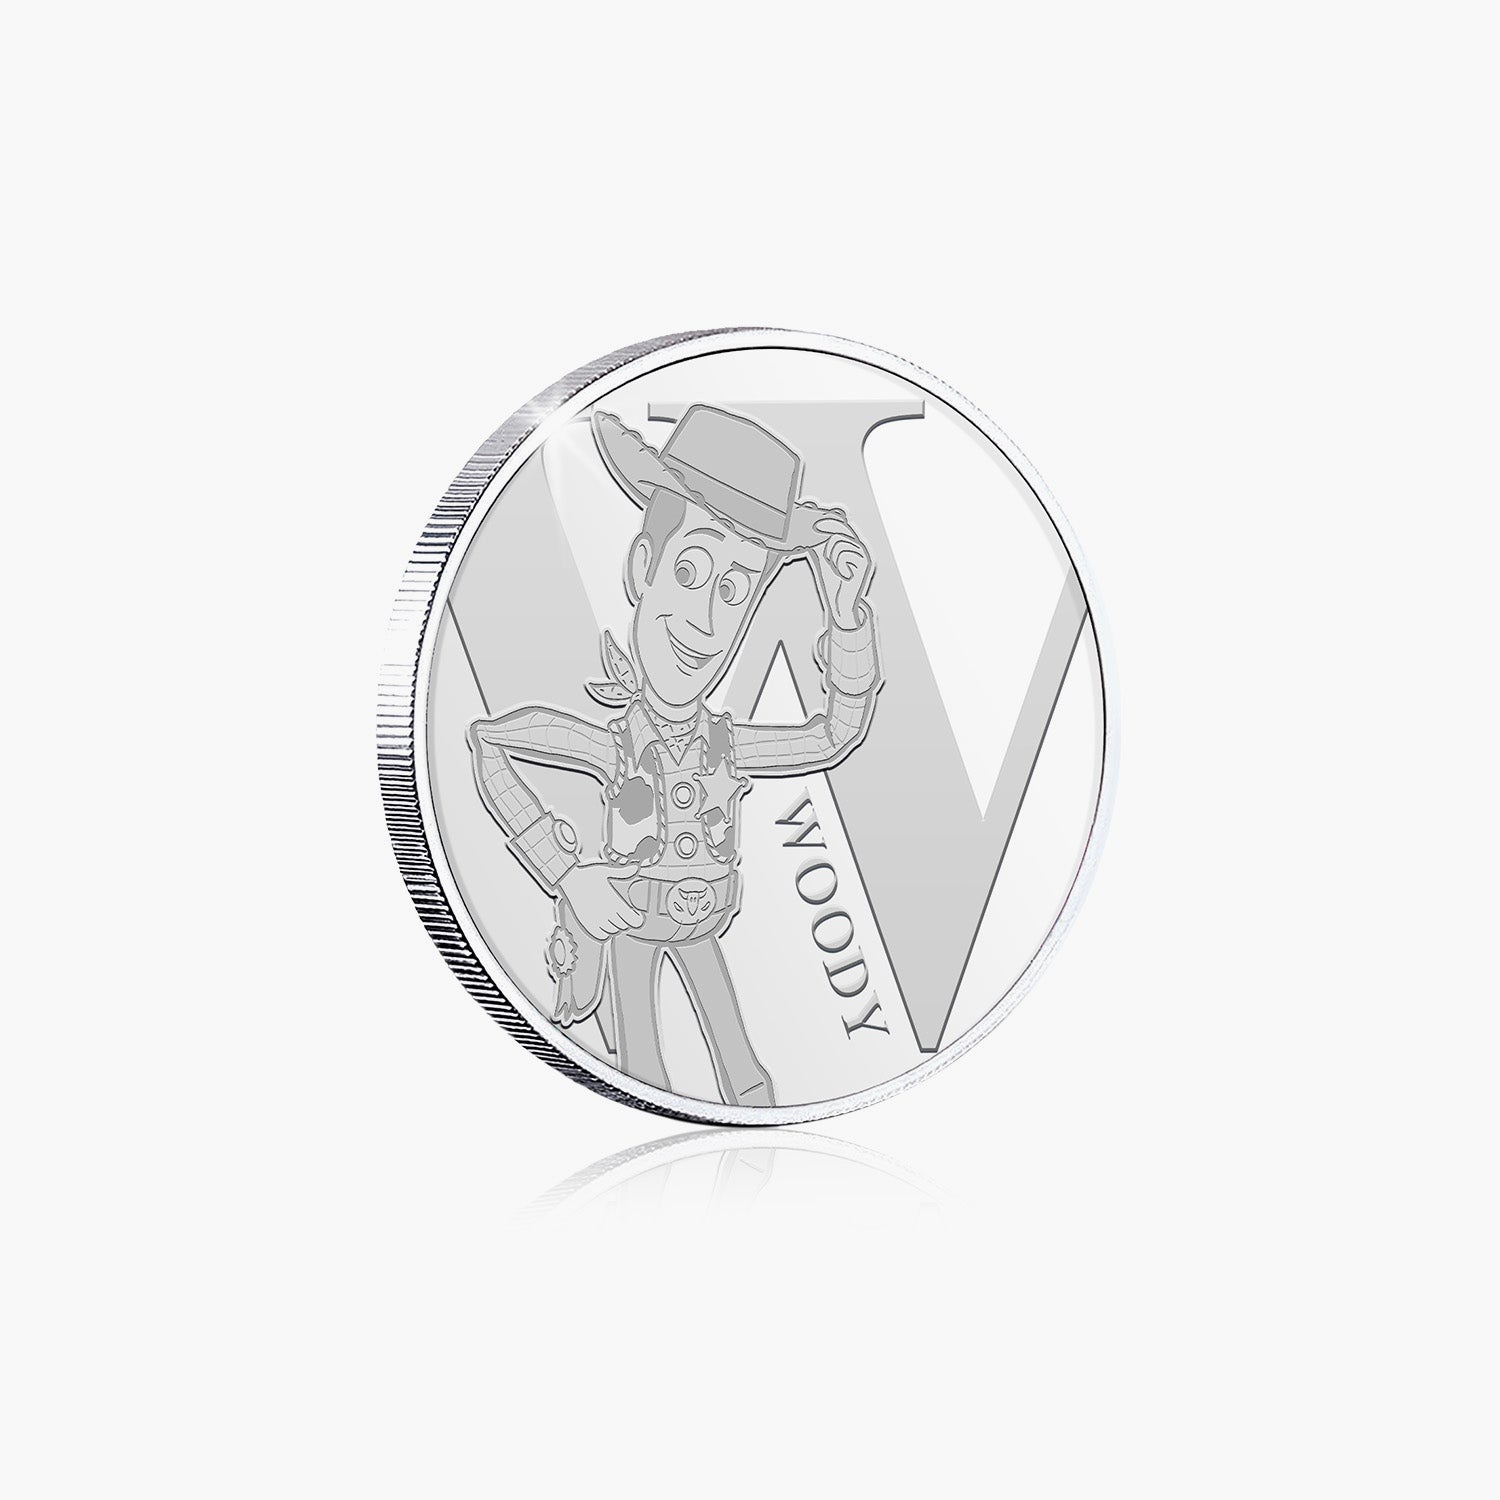 W Is For Woody Silver-Plated Commemorative